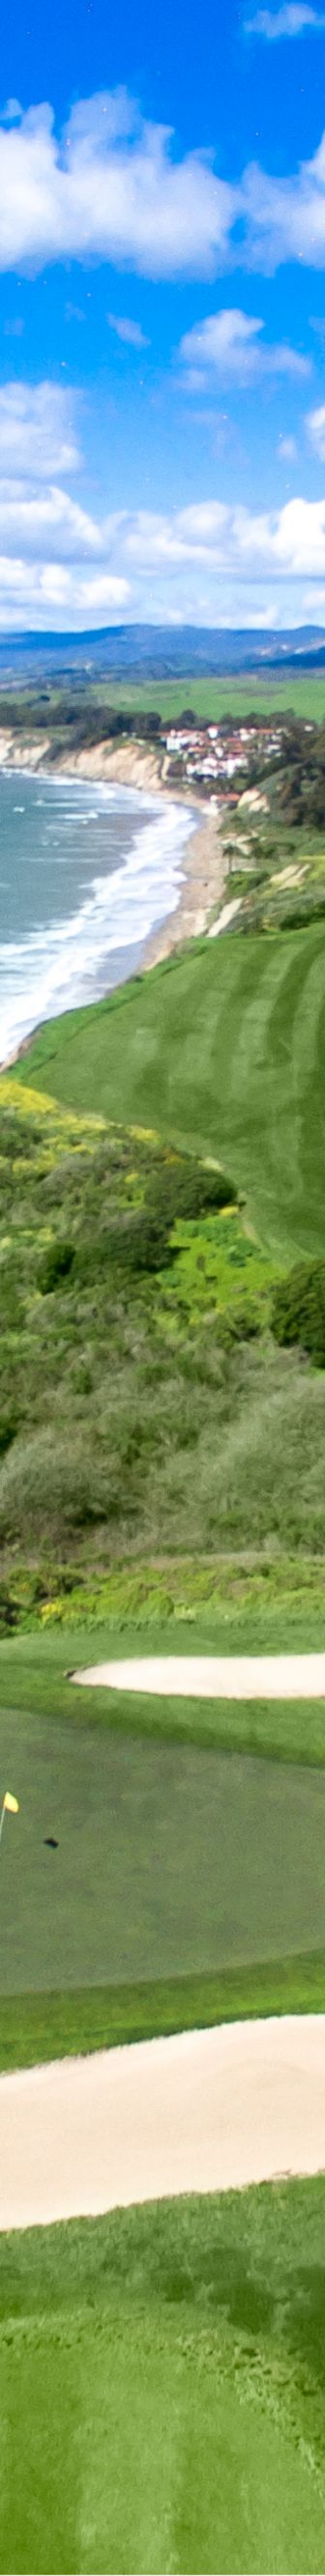 Aerial view of golf course with Ocean View.